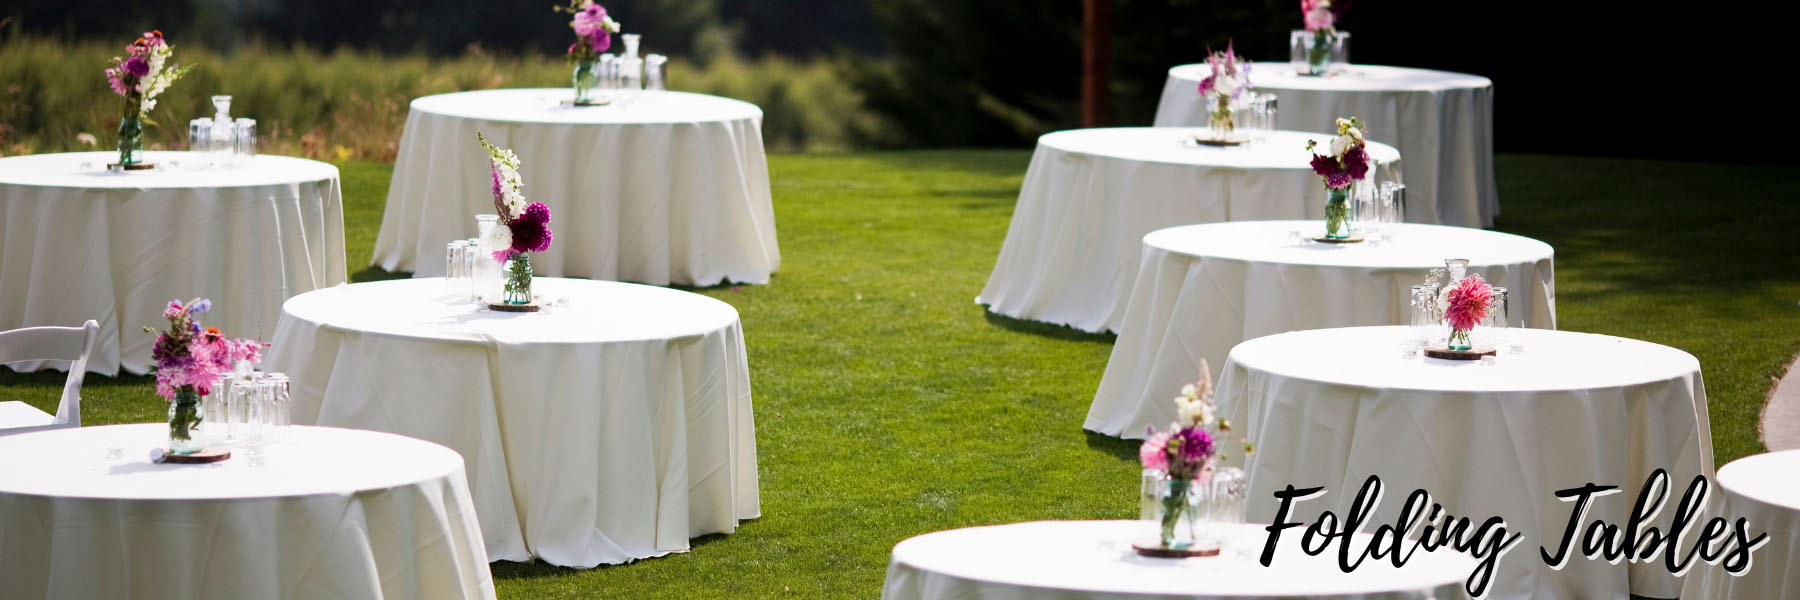 Folding Banquet Tables for Events